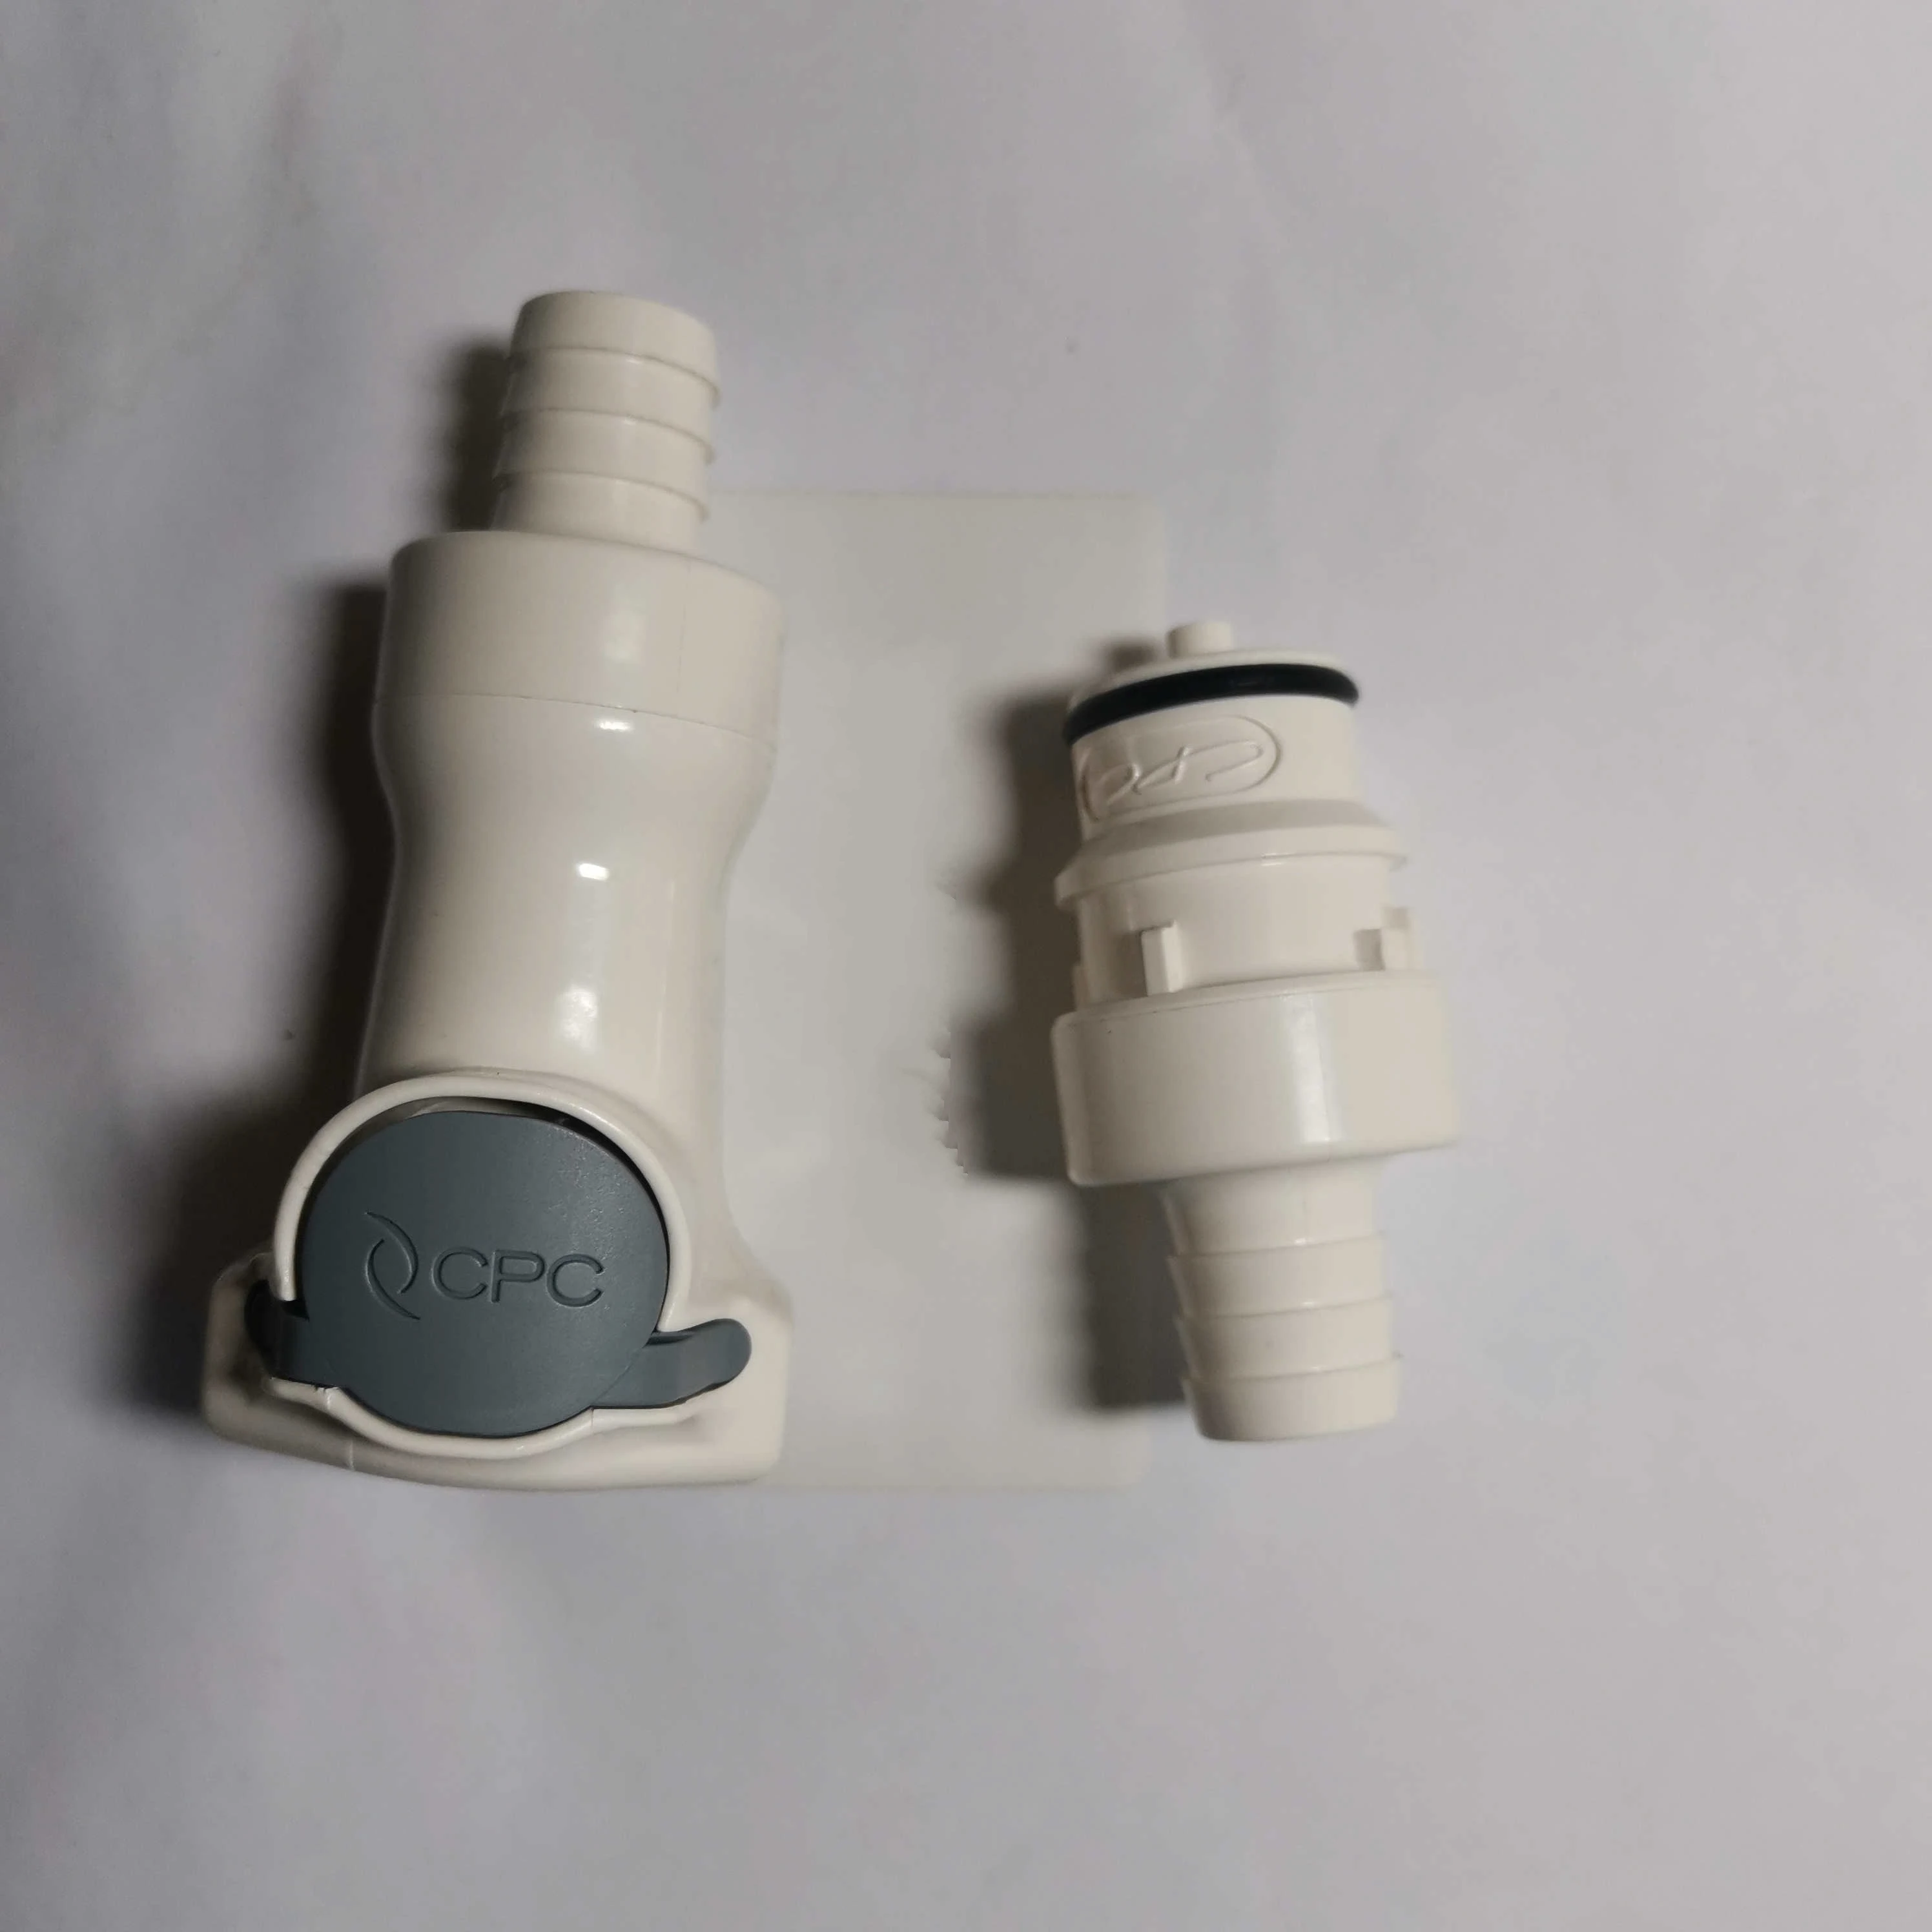 

Plastic CPC Connector and Fitting HFCD17835 HFCD22835 HFCD24835 HFCD16835 hfcd101235 hfcd241235